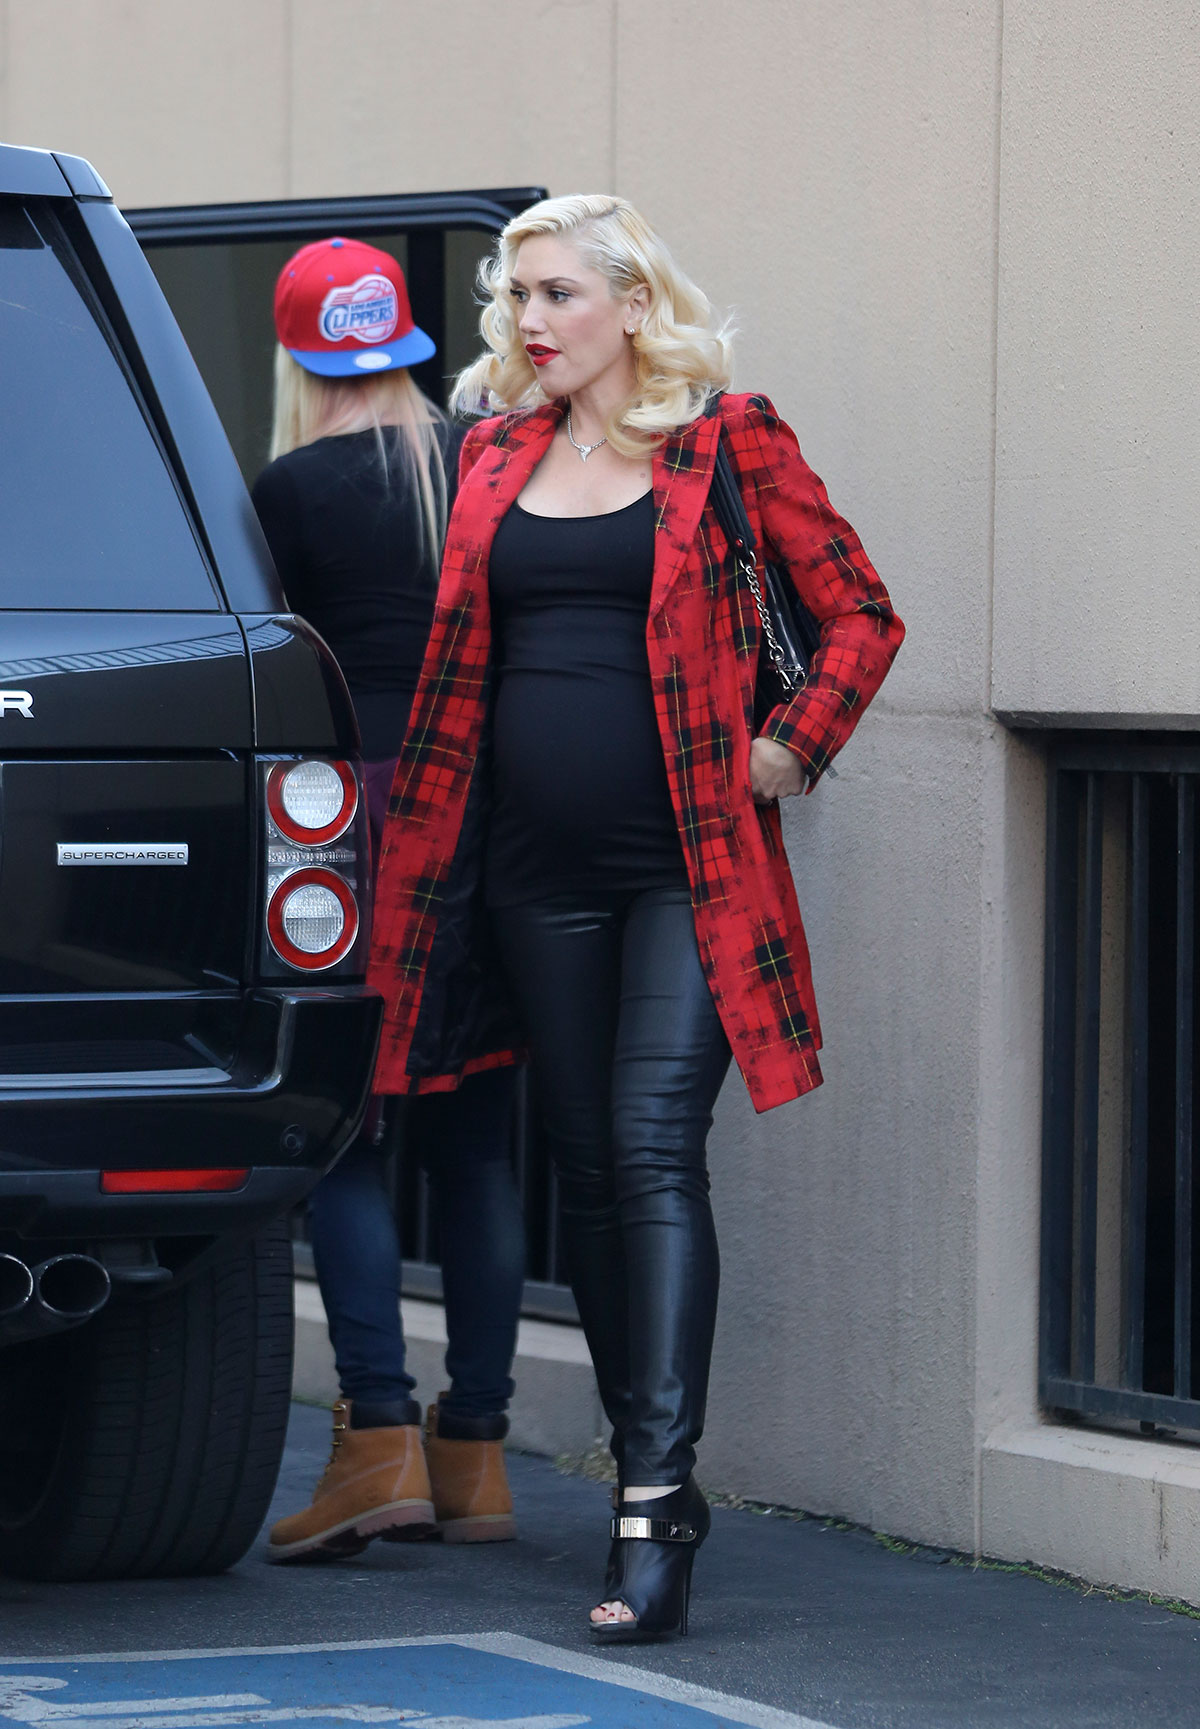 Gwen Stefani takes her kids to a Christmas party